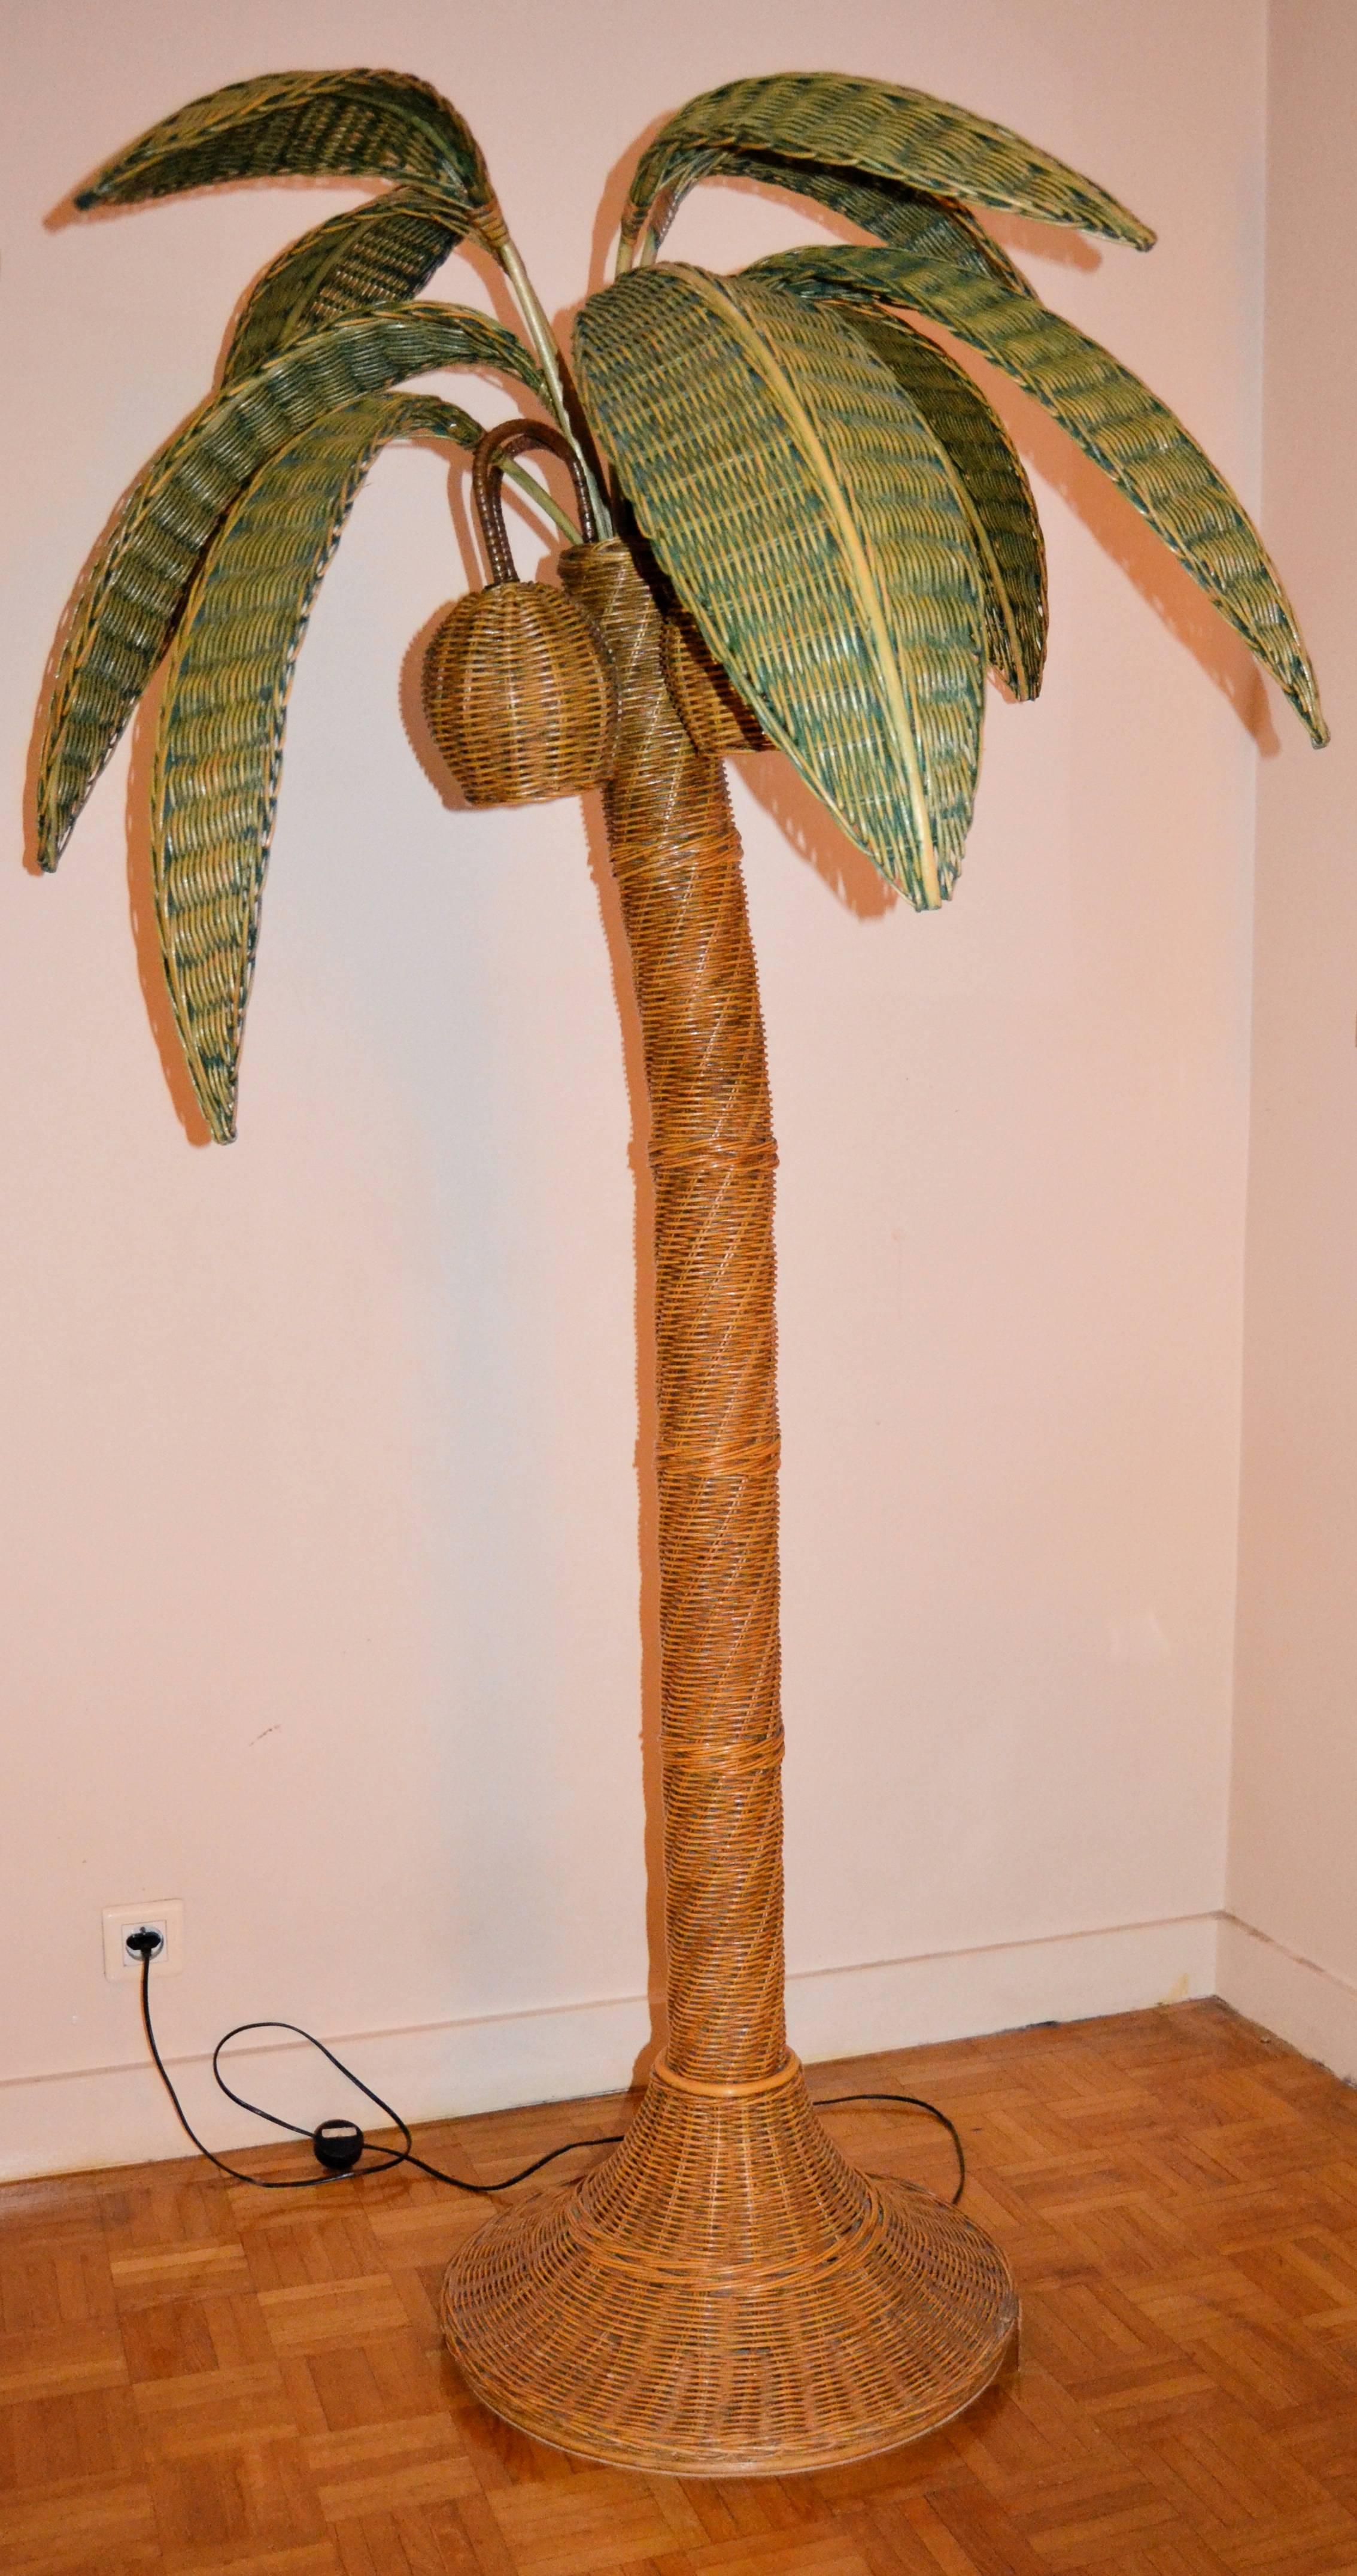 Amazing 1970s large palm tree in bamboo and rattan. Leafs has original green color.
The palm tree has three lights. It is in perfect condition for this vintage and unusual piece.
The leafs can be dissemble for shipping.
Lamp base is 60cm diameter.